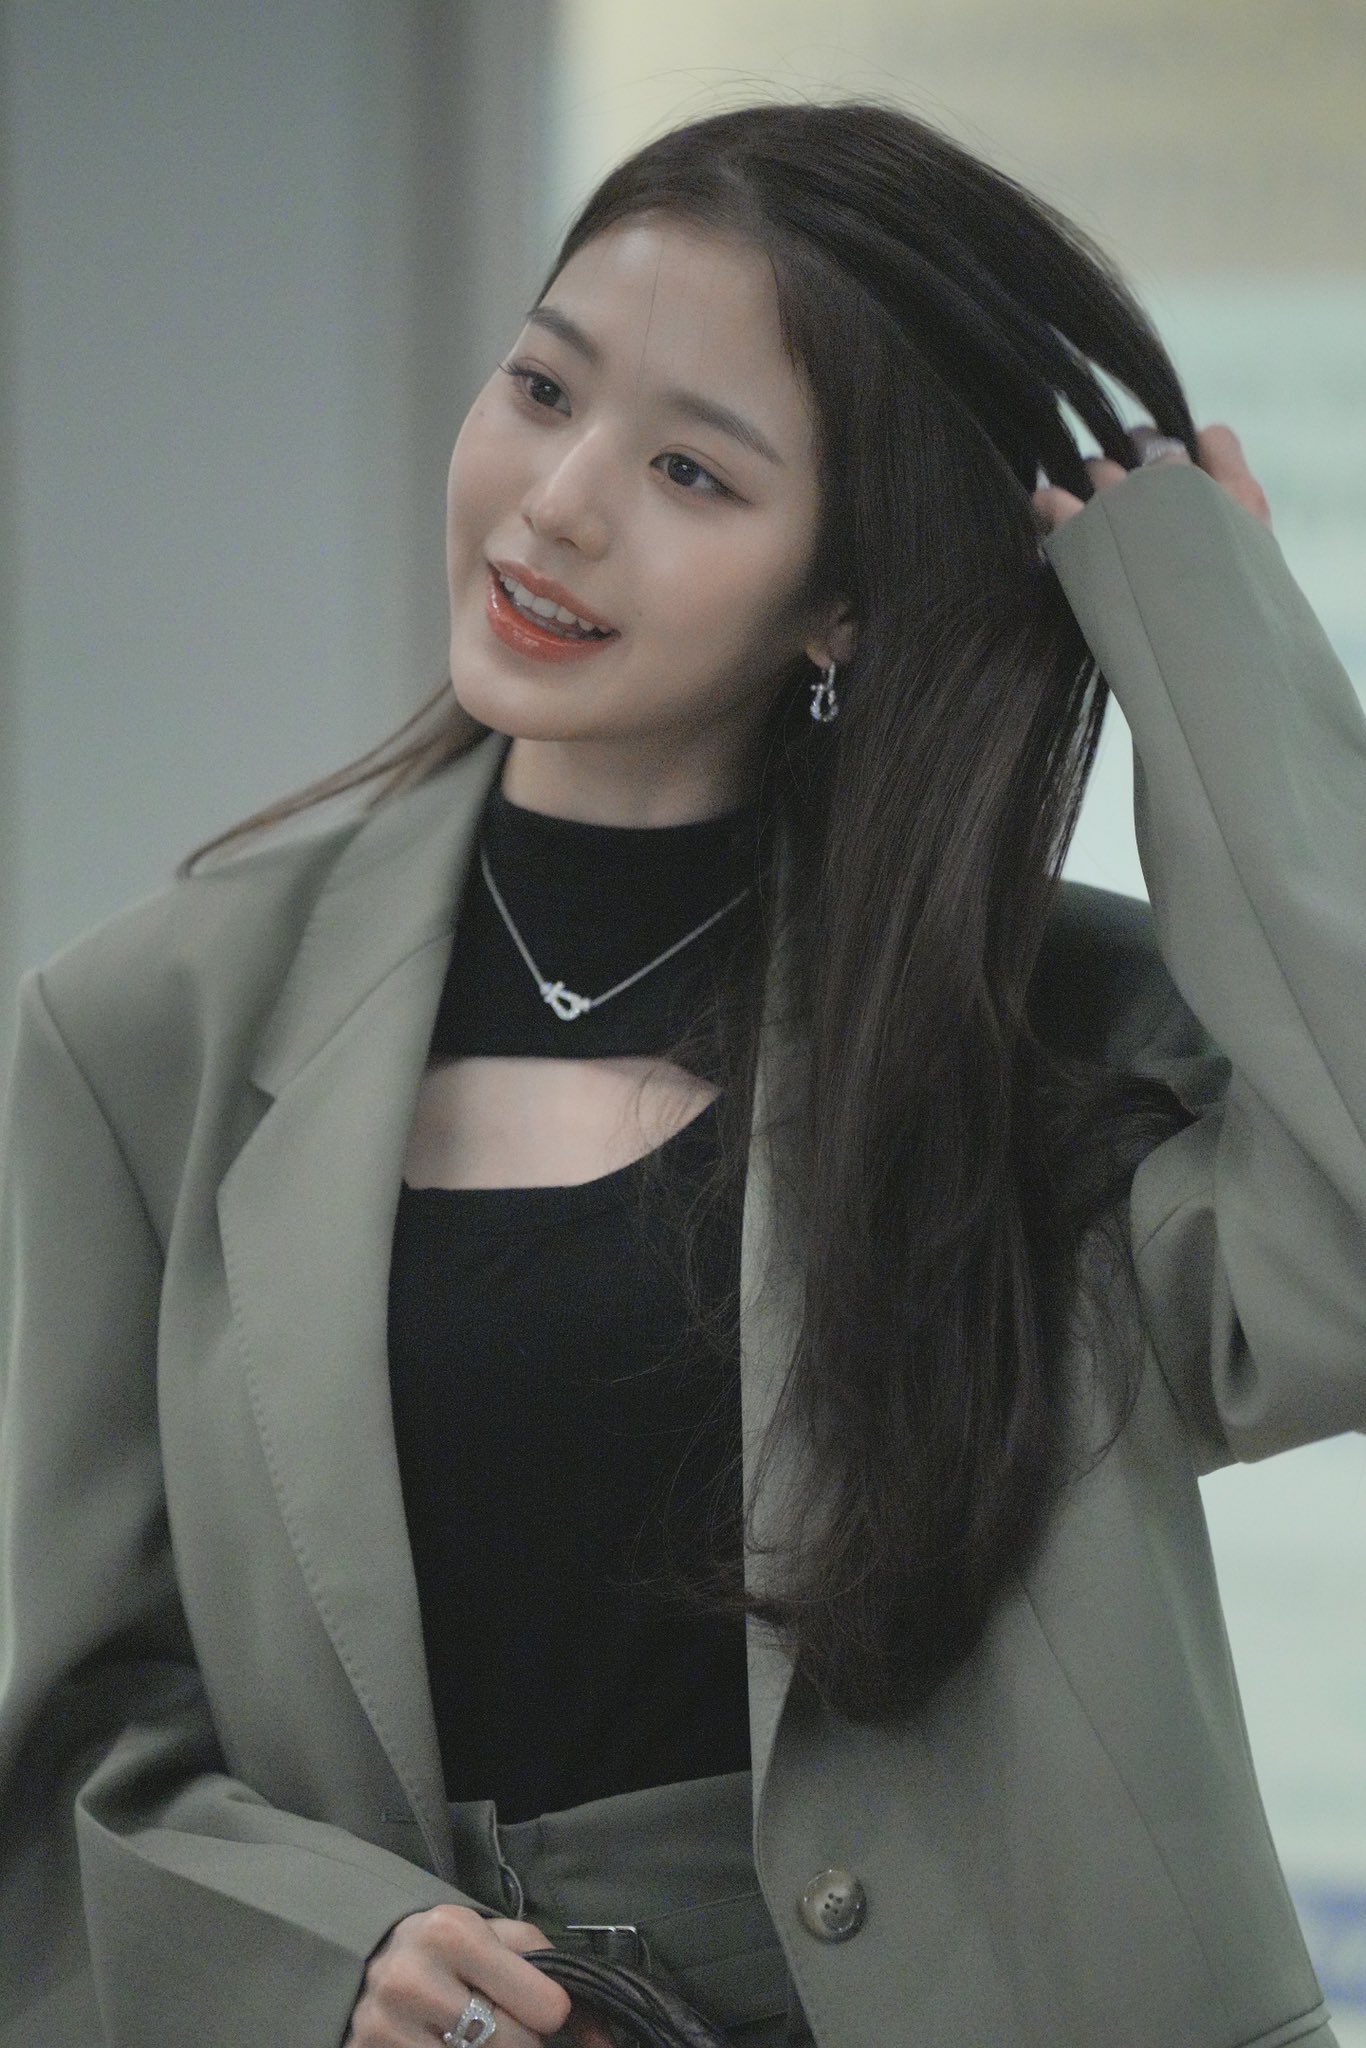 WONYOUNG GLOBAL on X: [📢] Jang Wonyoung will be attending her first  Jewelry exhibition in Paris. At events like this, brand engagements are  very important as it helps measure Wonyoung's influence as